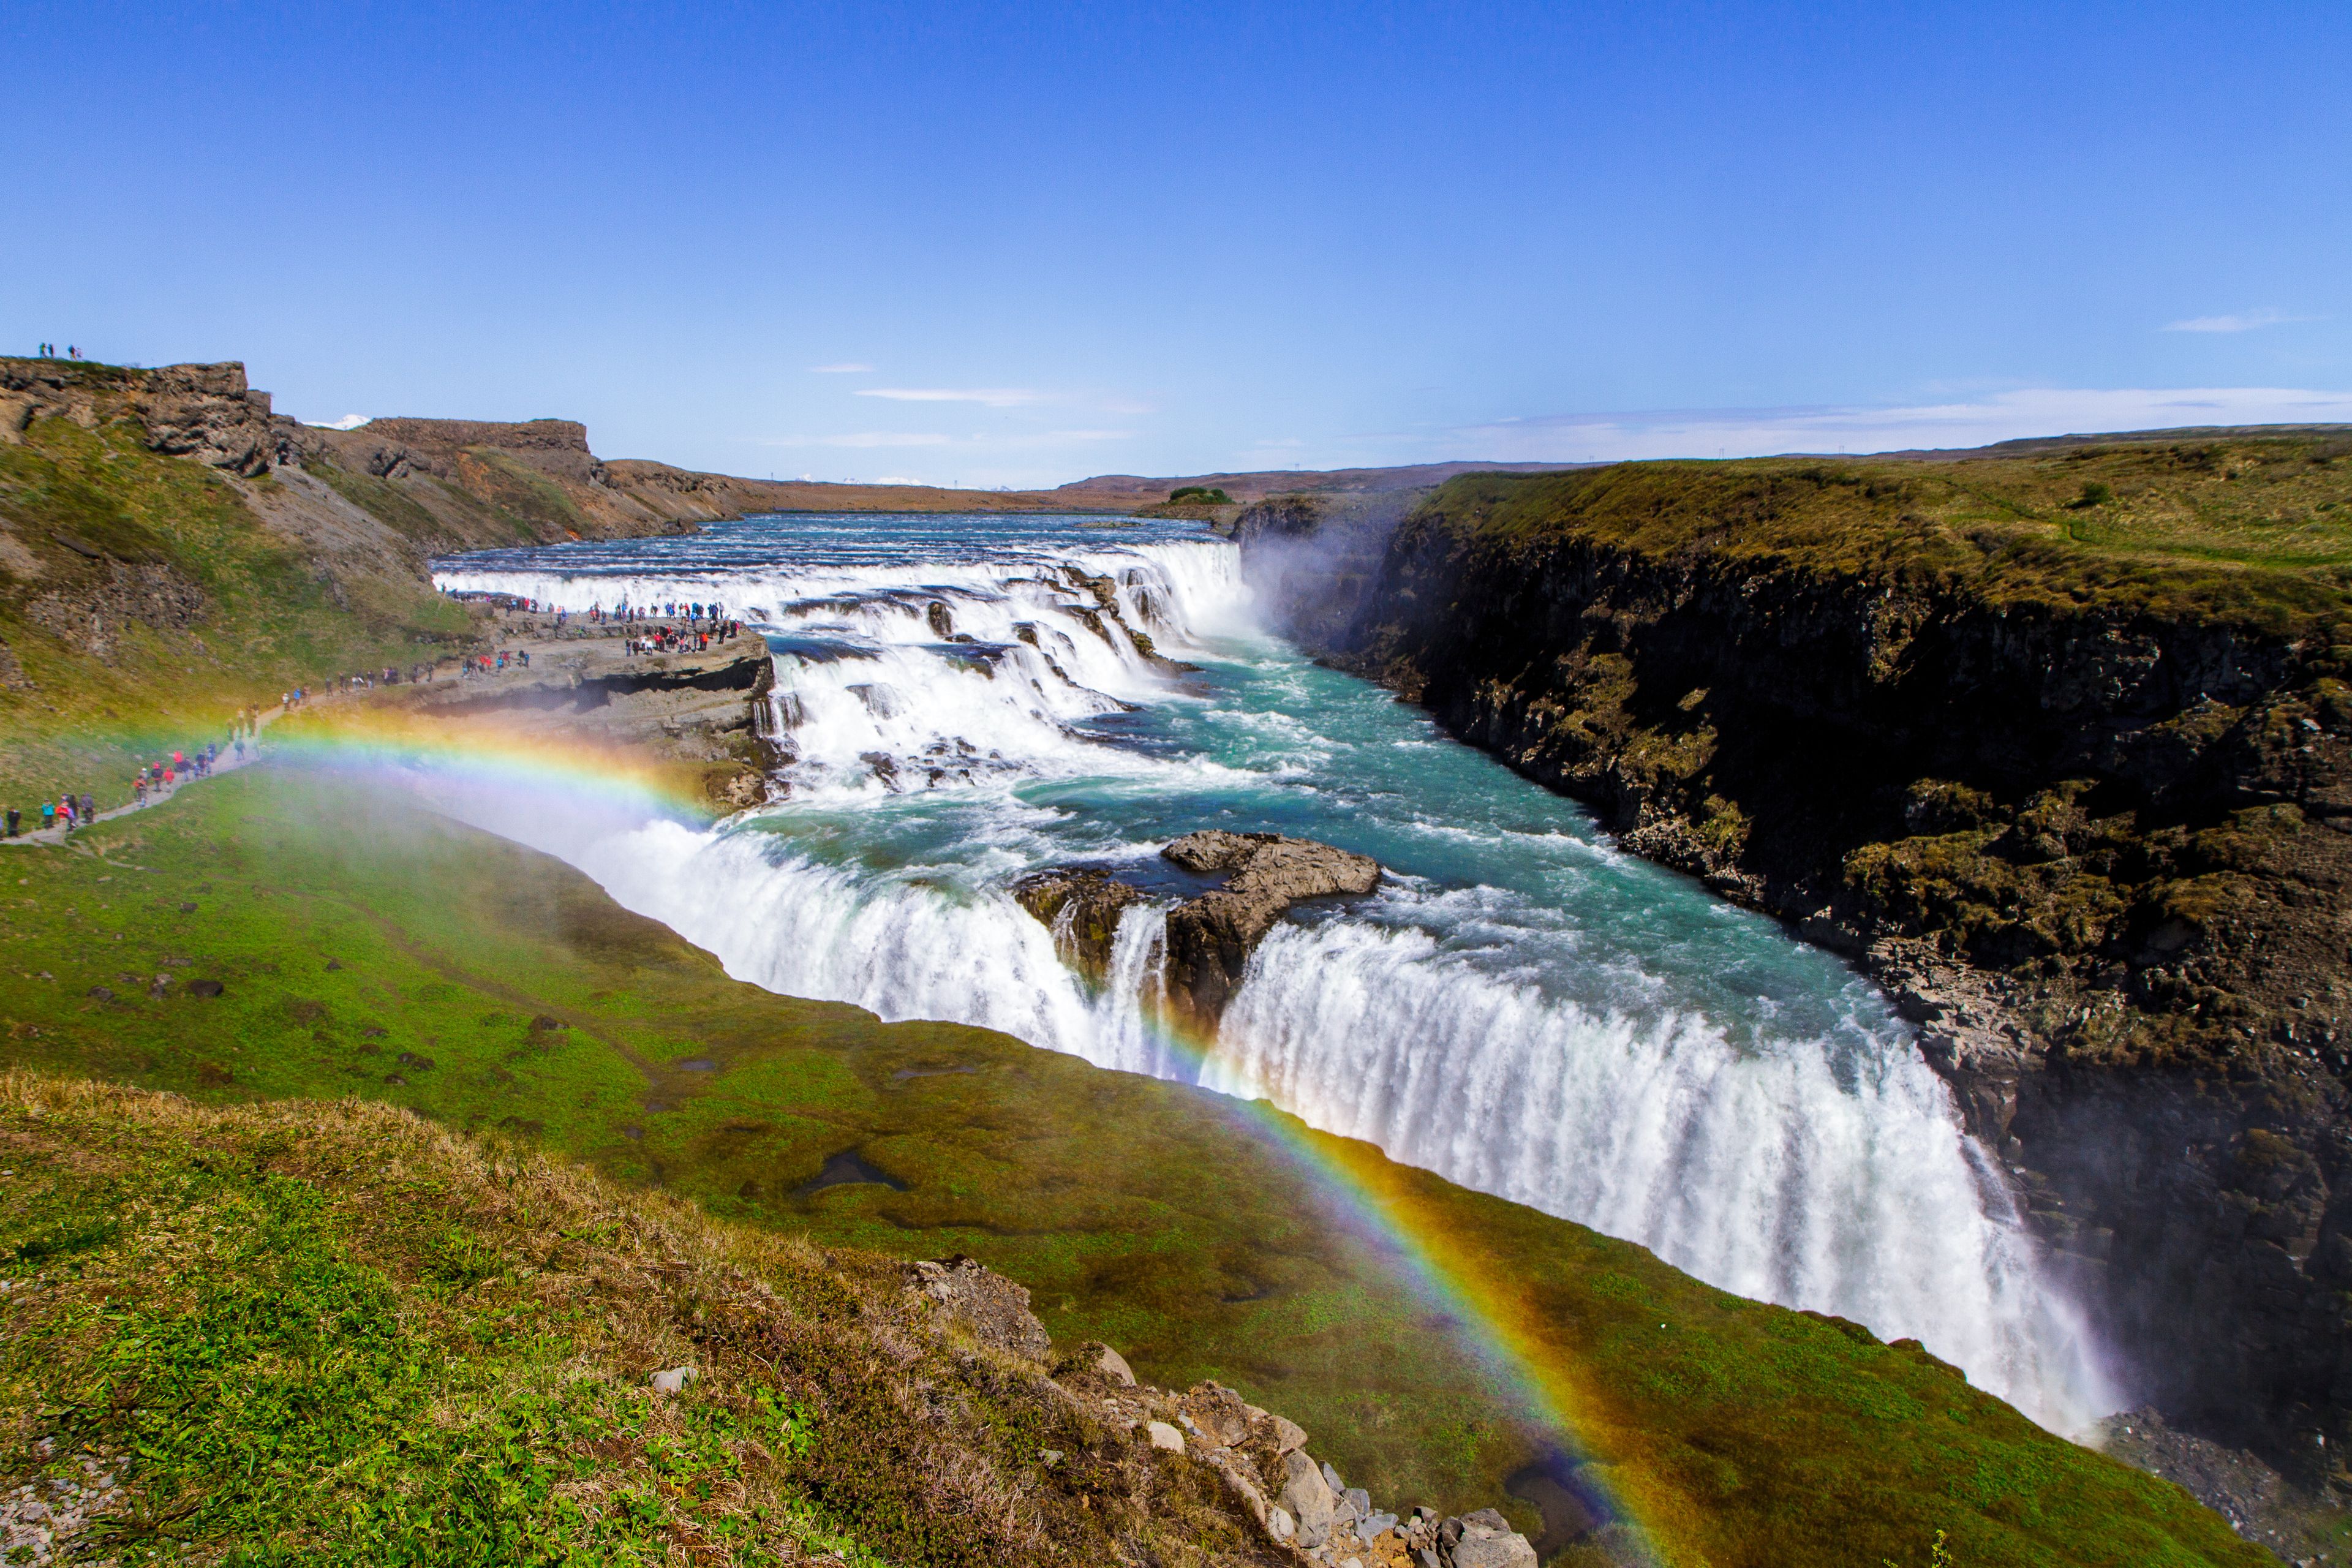 What could be more beautiful than the Gullfoss waterfall with a splendid rainbow